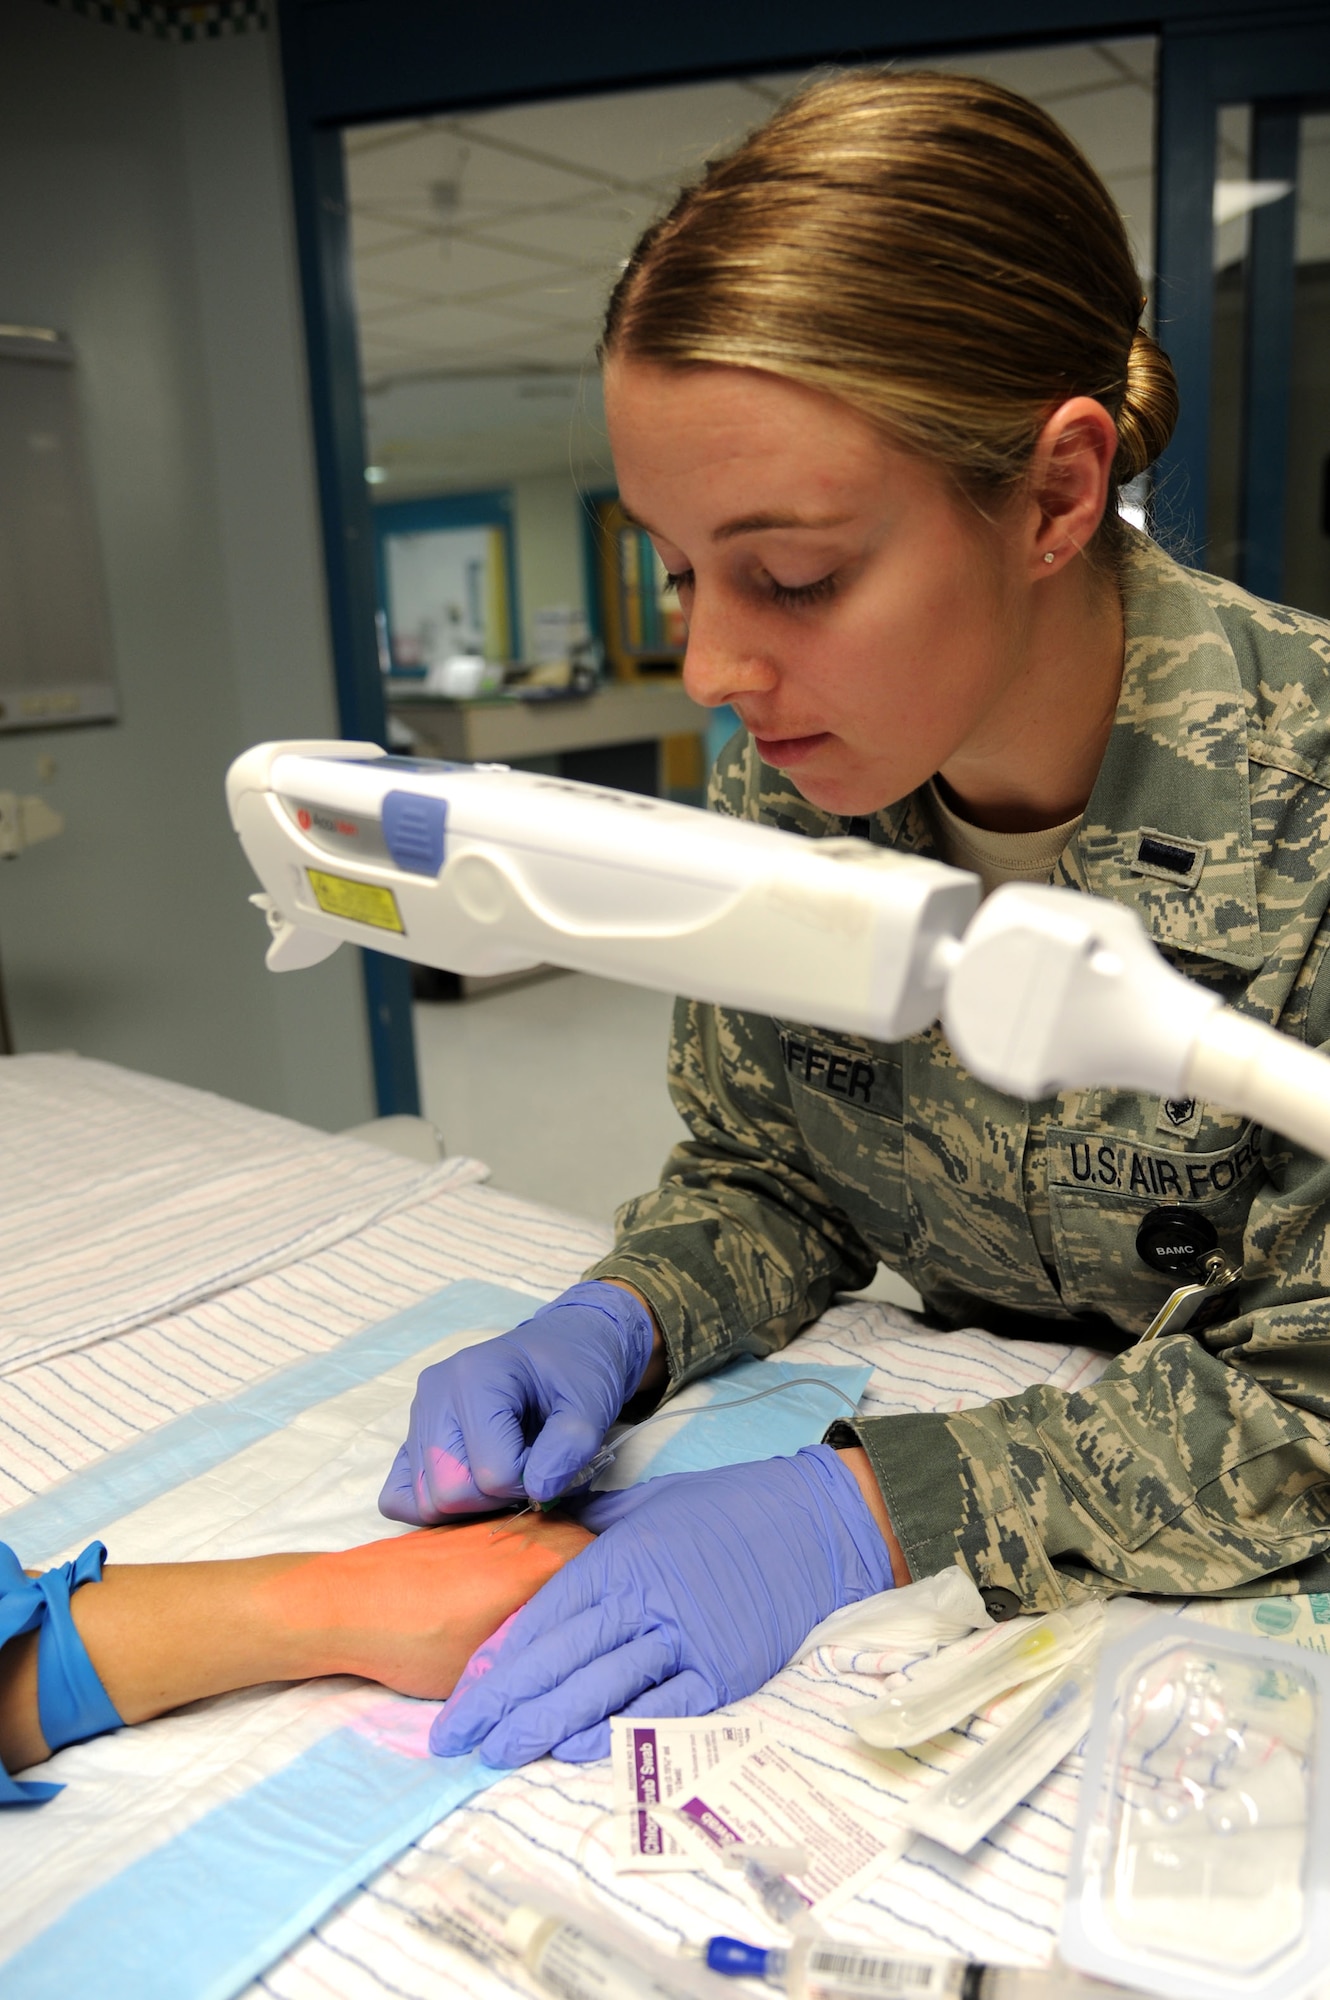 1st Lt. Meredith Peiffer, a critical care nurse fellow with the 59th Training Squadron, prepares an IV drip in the pediatric intensive care unit at University Health System Feb. 7.  The recent partnership between the 59th Medical Wing and UHS is the first of its kind, developing highly skilled nurses for humanitarian and peacetime missions. (U.S. Air Force Photo/Staff Sgt. Micky M. Bazaldua)